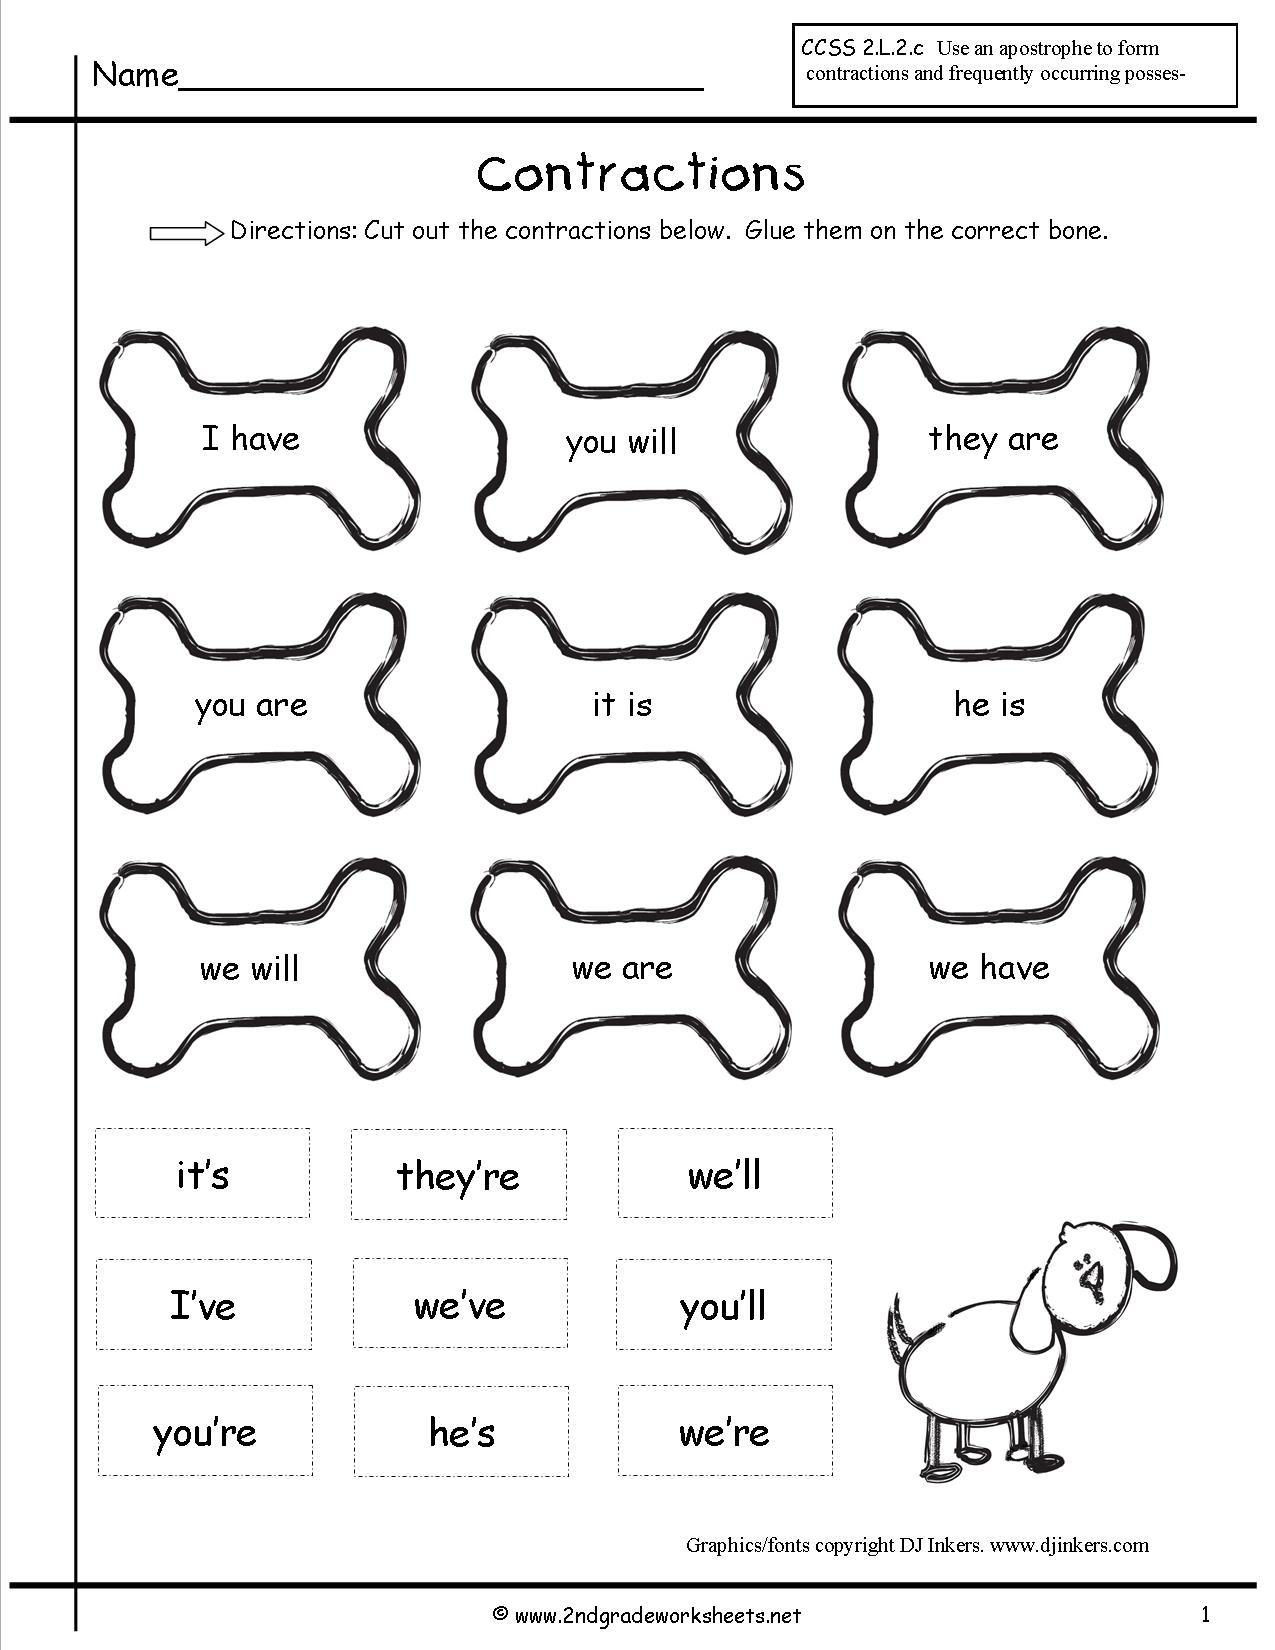 Free Contractions Worksheets And Printouts | Printable Contraction Worksheets 2Nd Grade